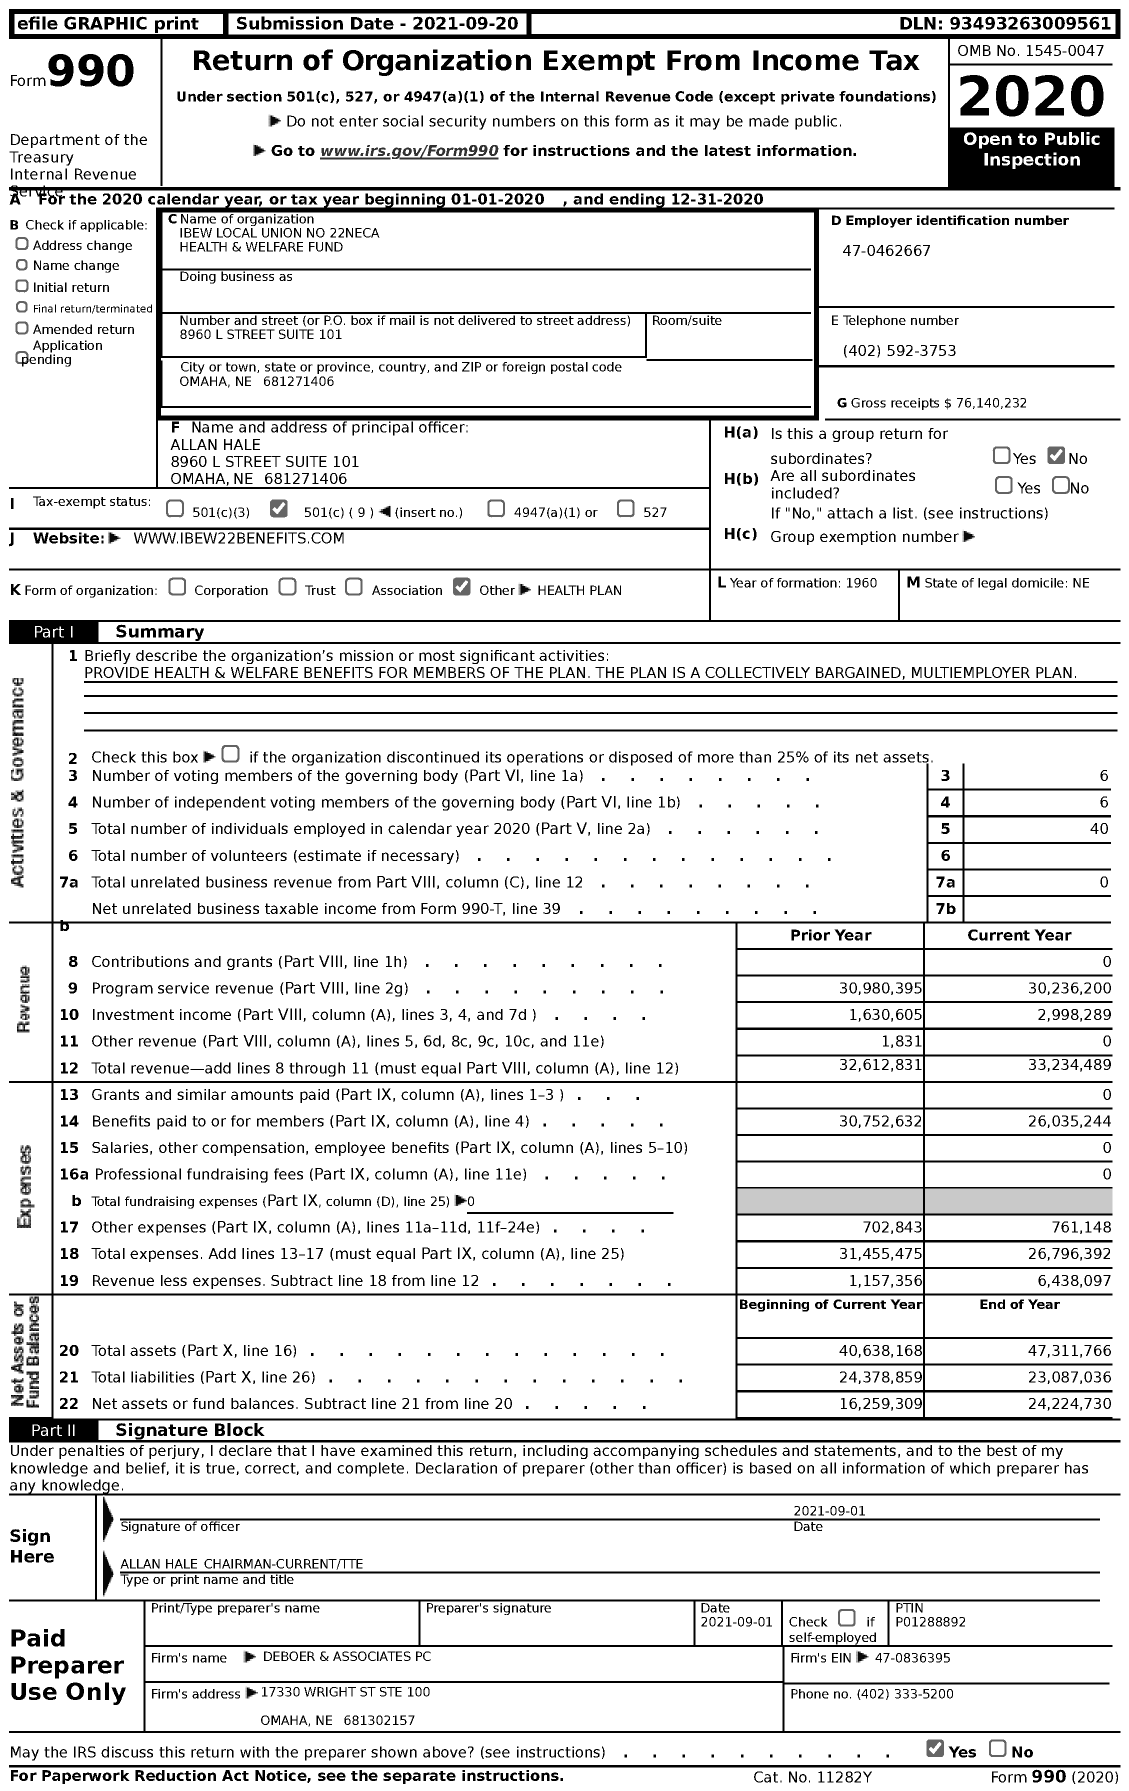 Image of first page of 2020 Form 990 for IBEW Local Union No 22neca Health and Welfare Fund